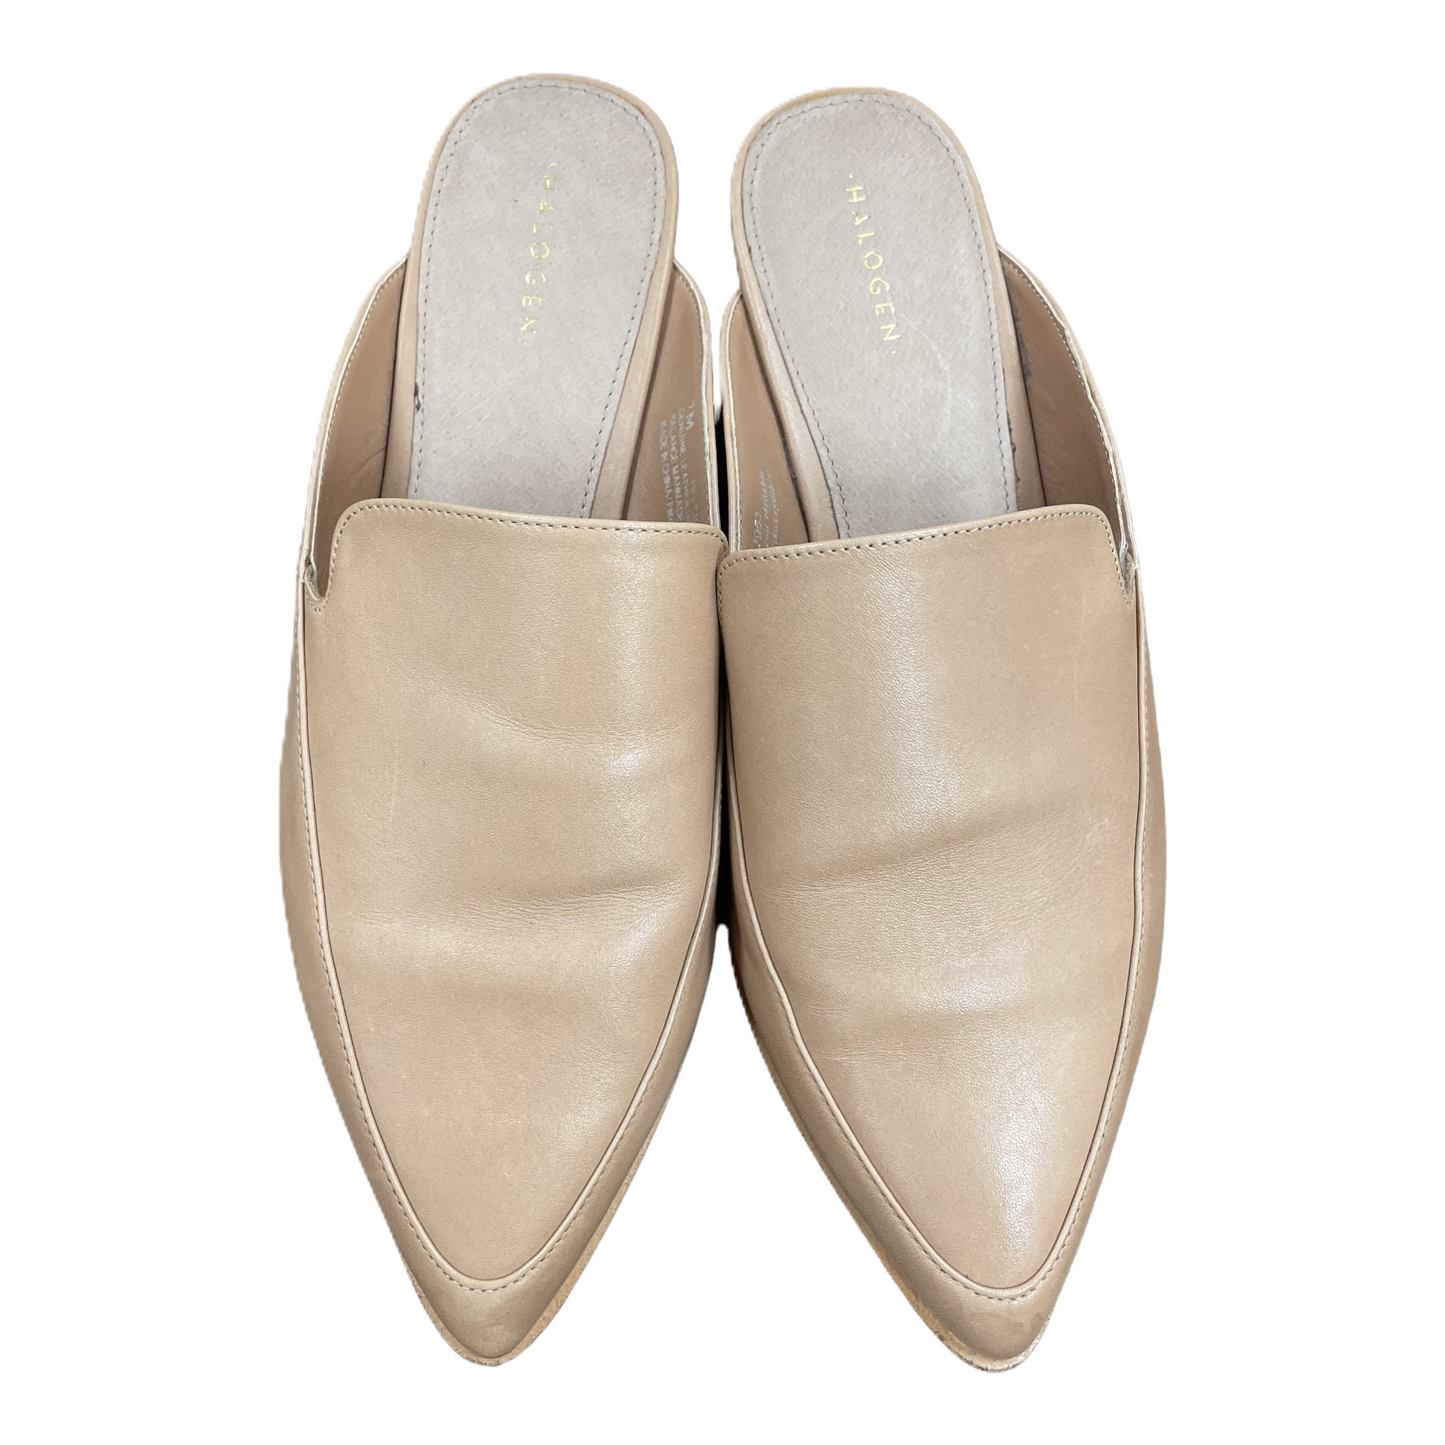 Tan Shoes Flats By Halogen, Size: 7